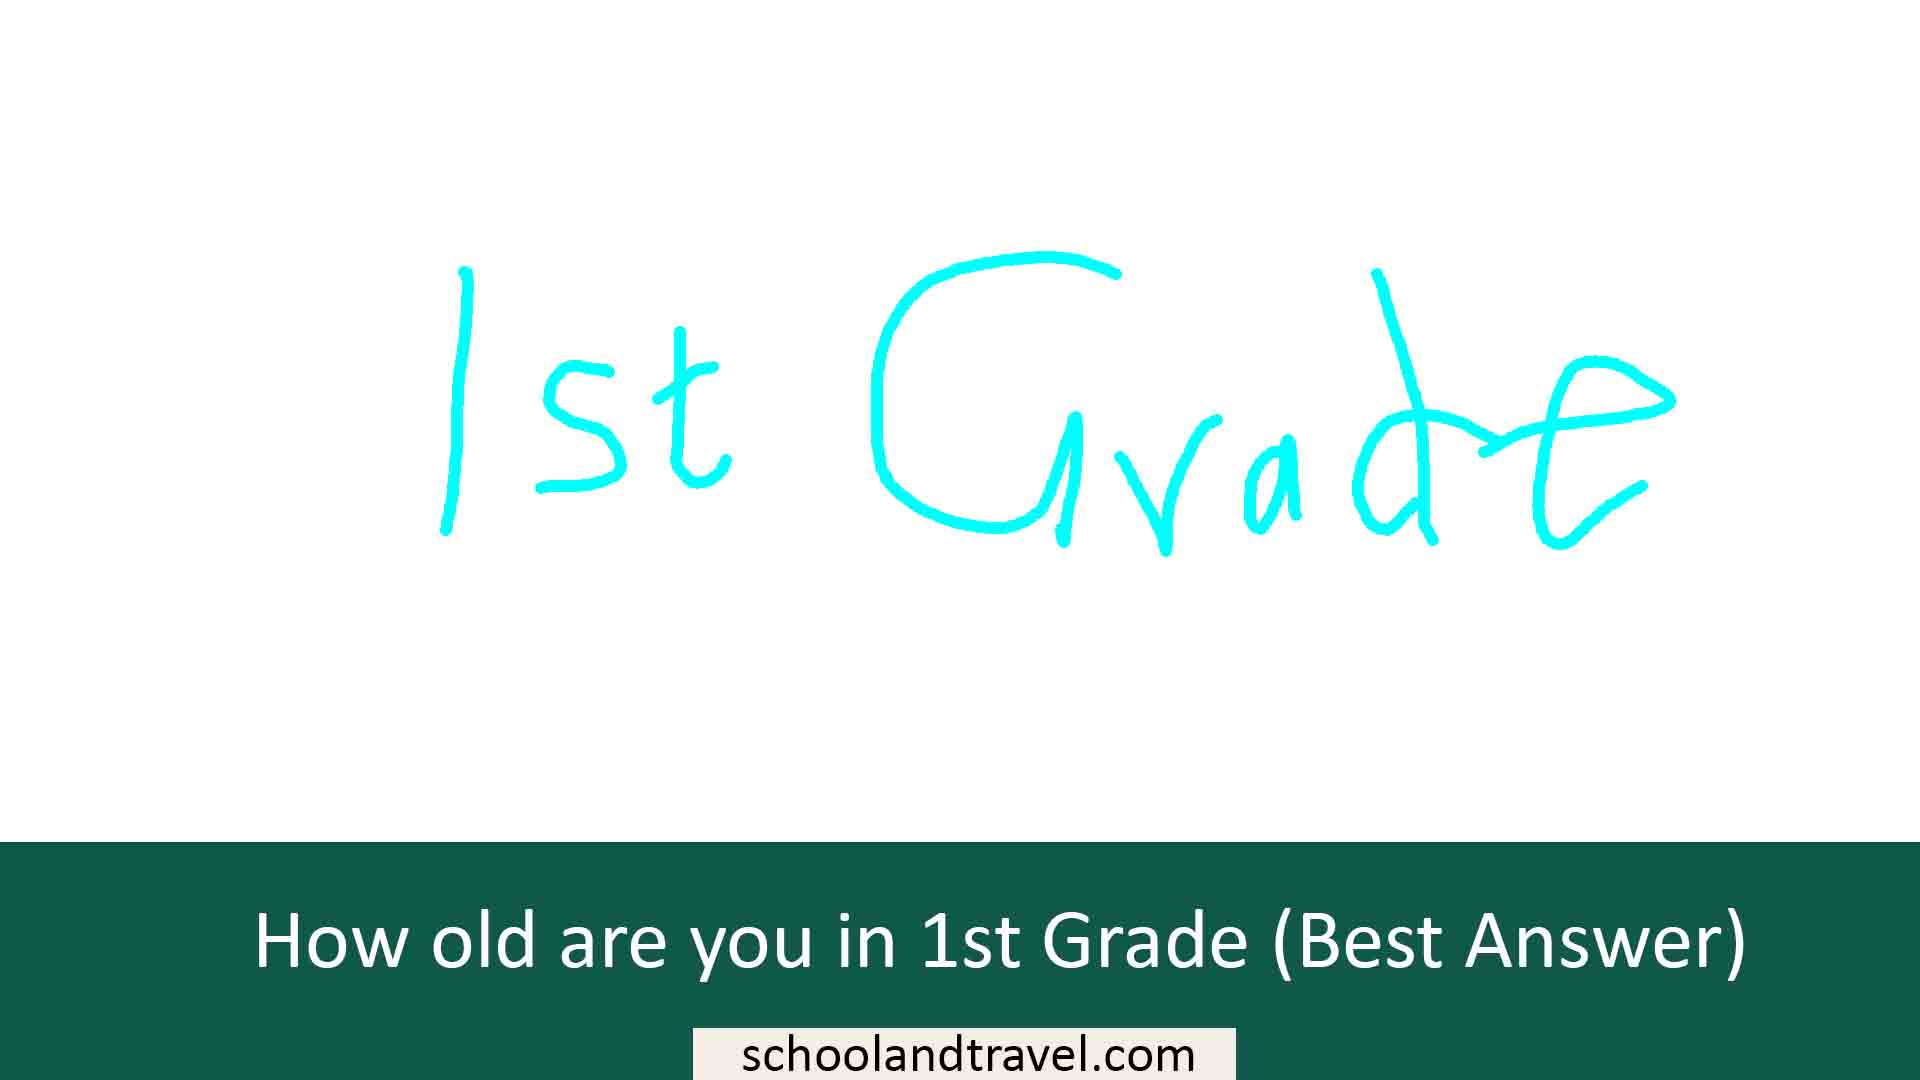 How old are you in 1st Grade (Best Answer)